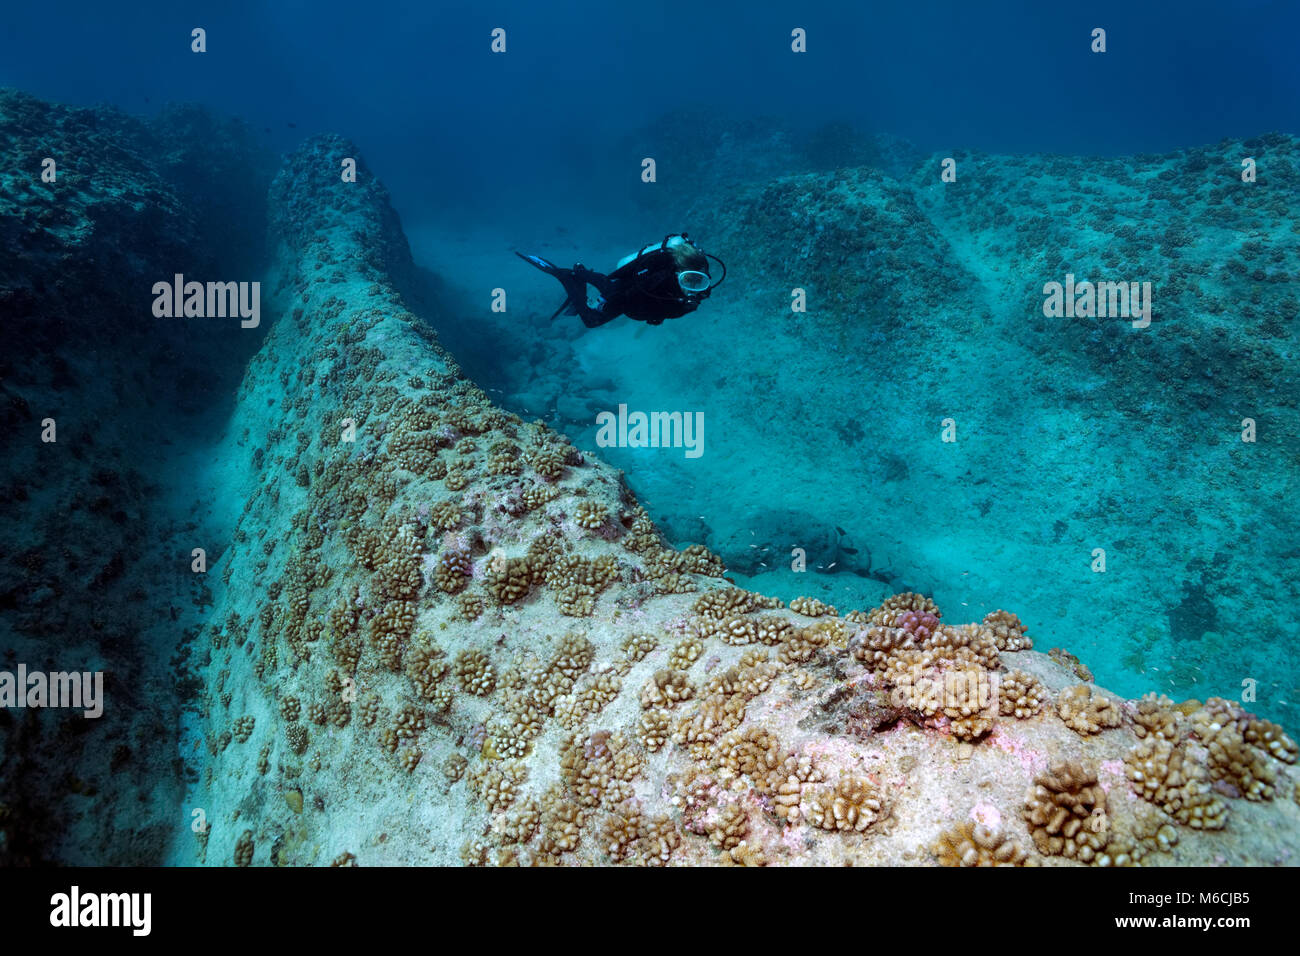 Diver swims over reef ridges with cauliflower corals (Pocillopora meandrina), coral reef, fault, Pacific Ocean, French Polynesia Stock Photo